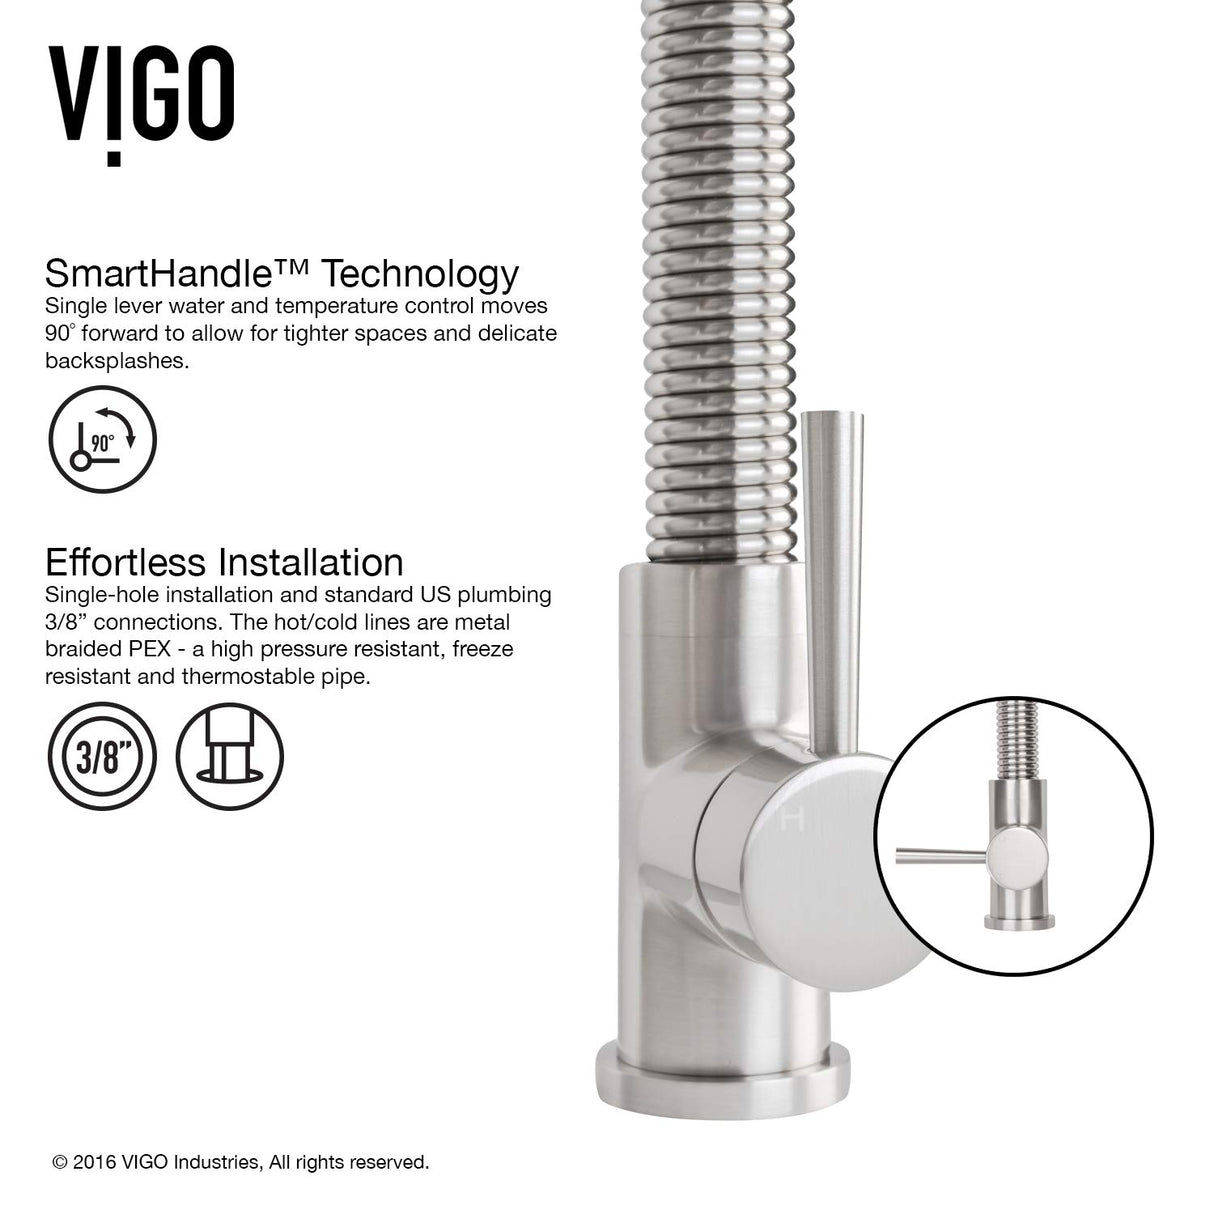 VIGO VG02001STK2 19" H Edison Single-Handle with Pull-Down Sprayer Kitchen Faucet with Soap Dispenser in Stainless Steel